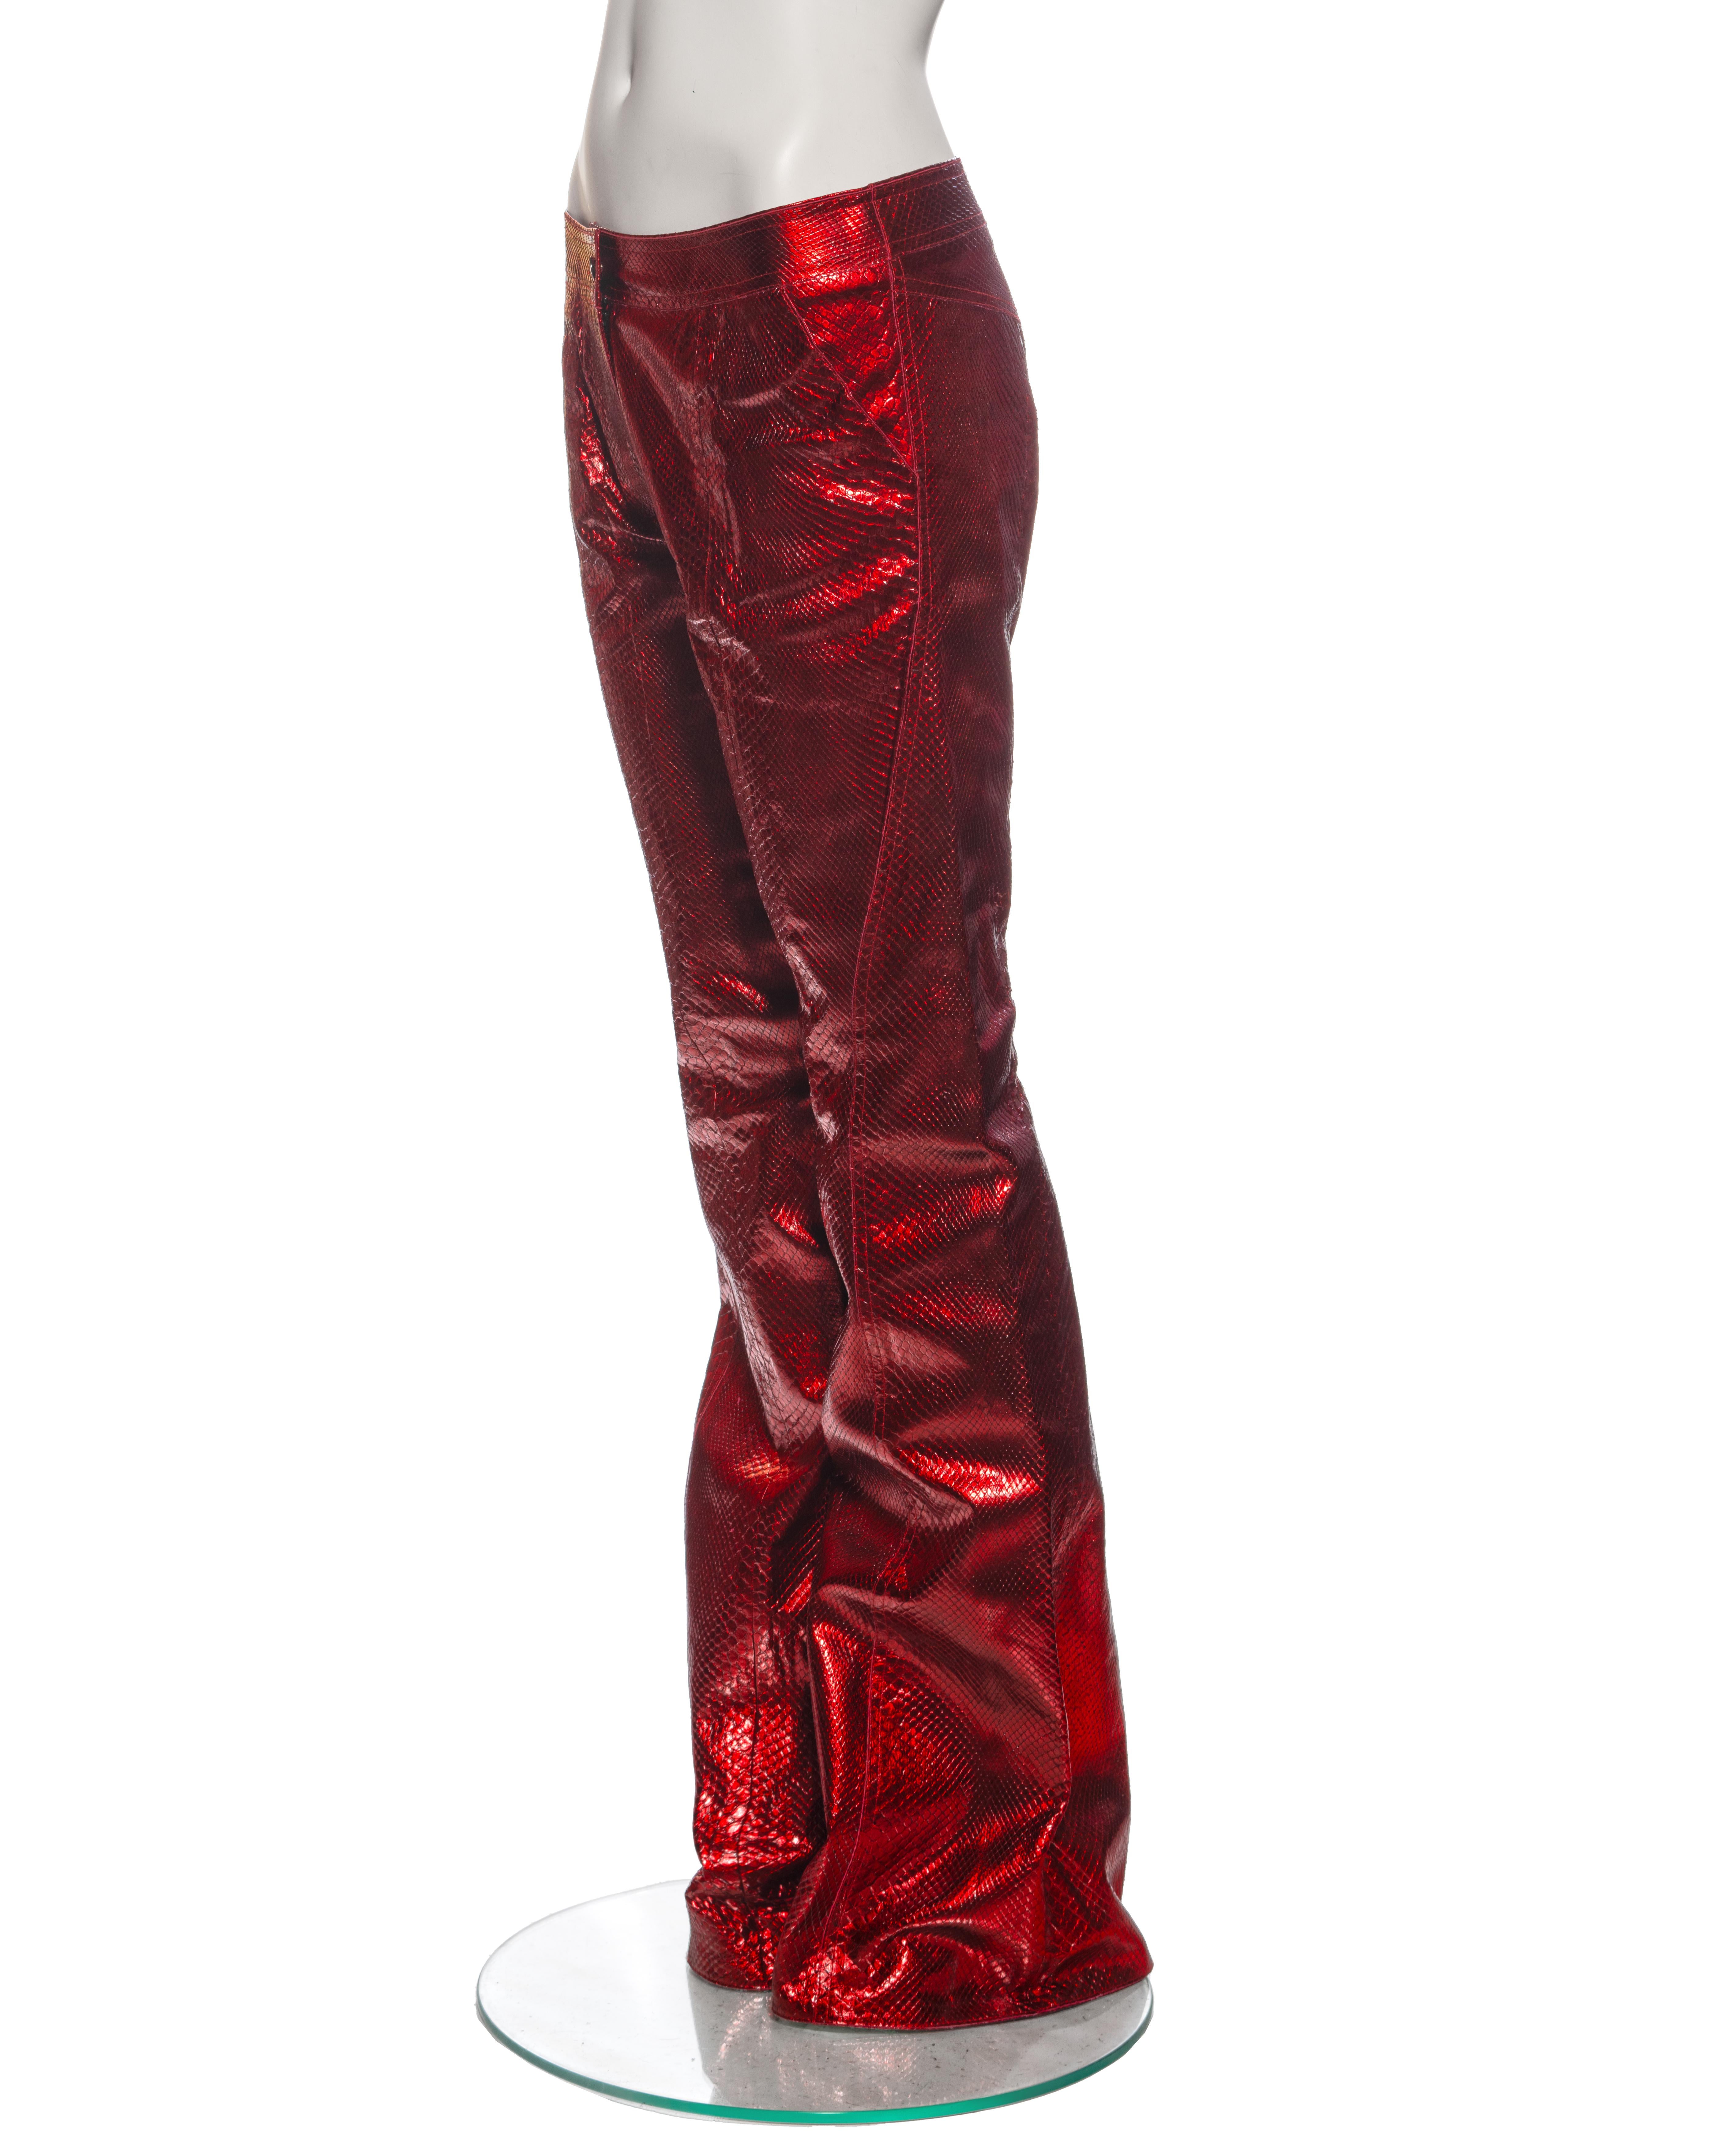 Christian Dior by John Galliano Metallic Red Python Flared Trousers, ss 2002 For Sale 4